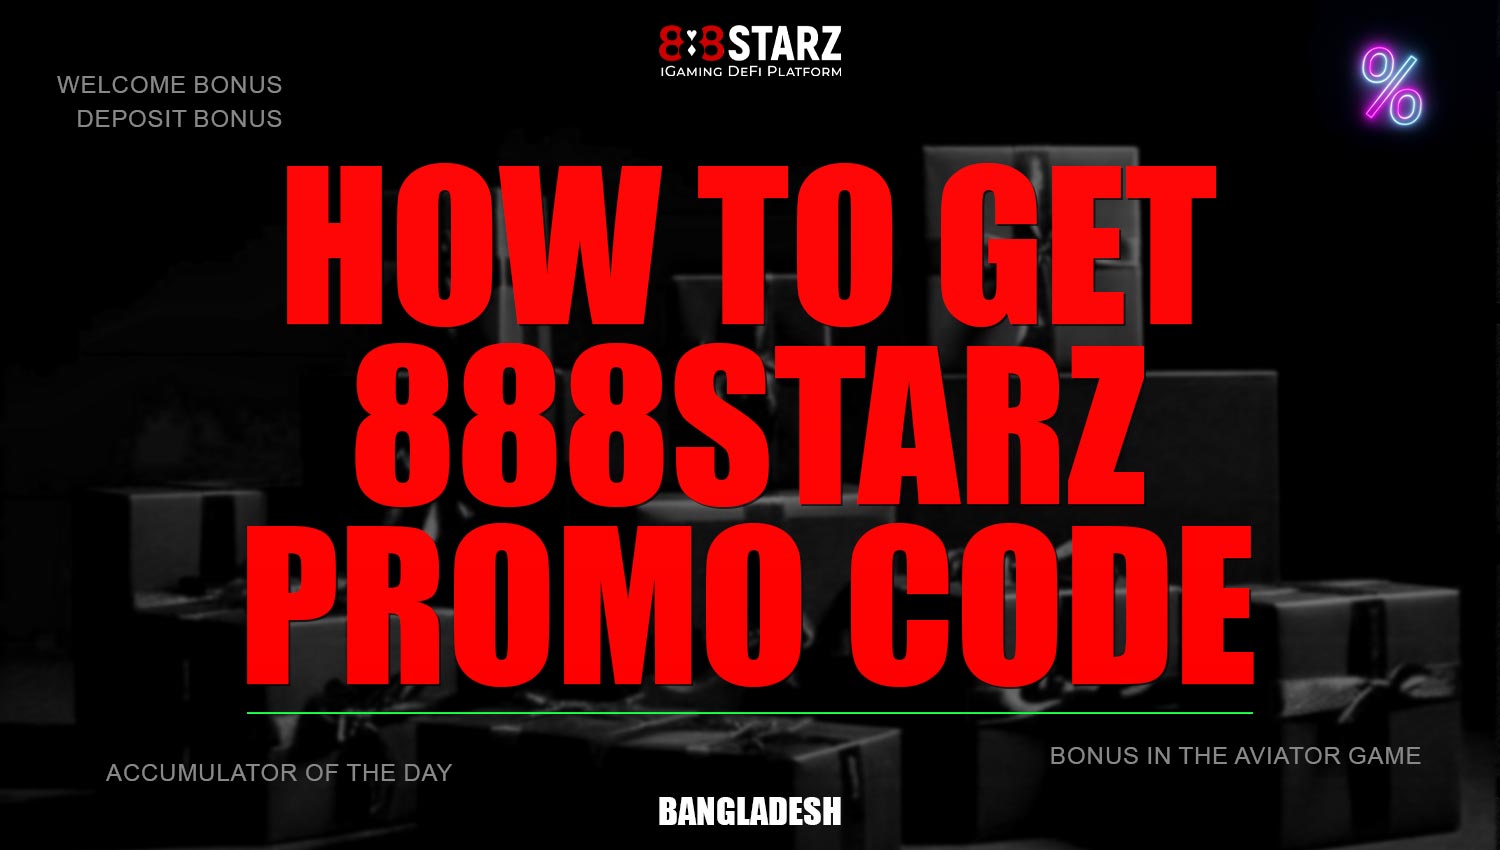 Guide on how to get a promo code.